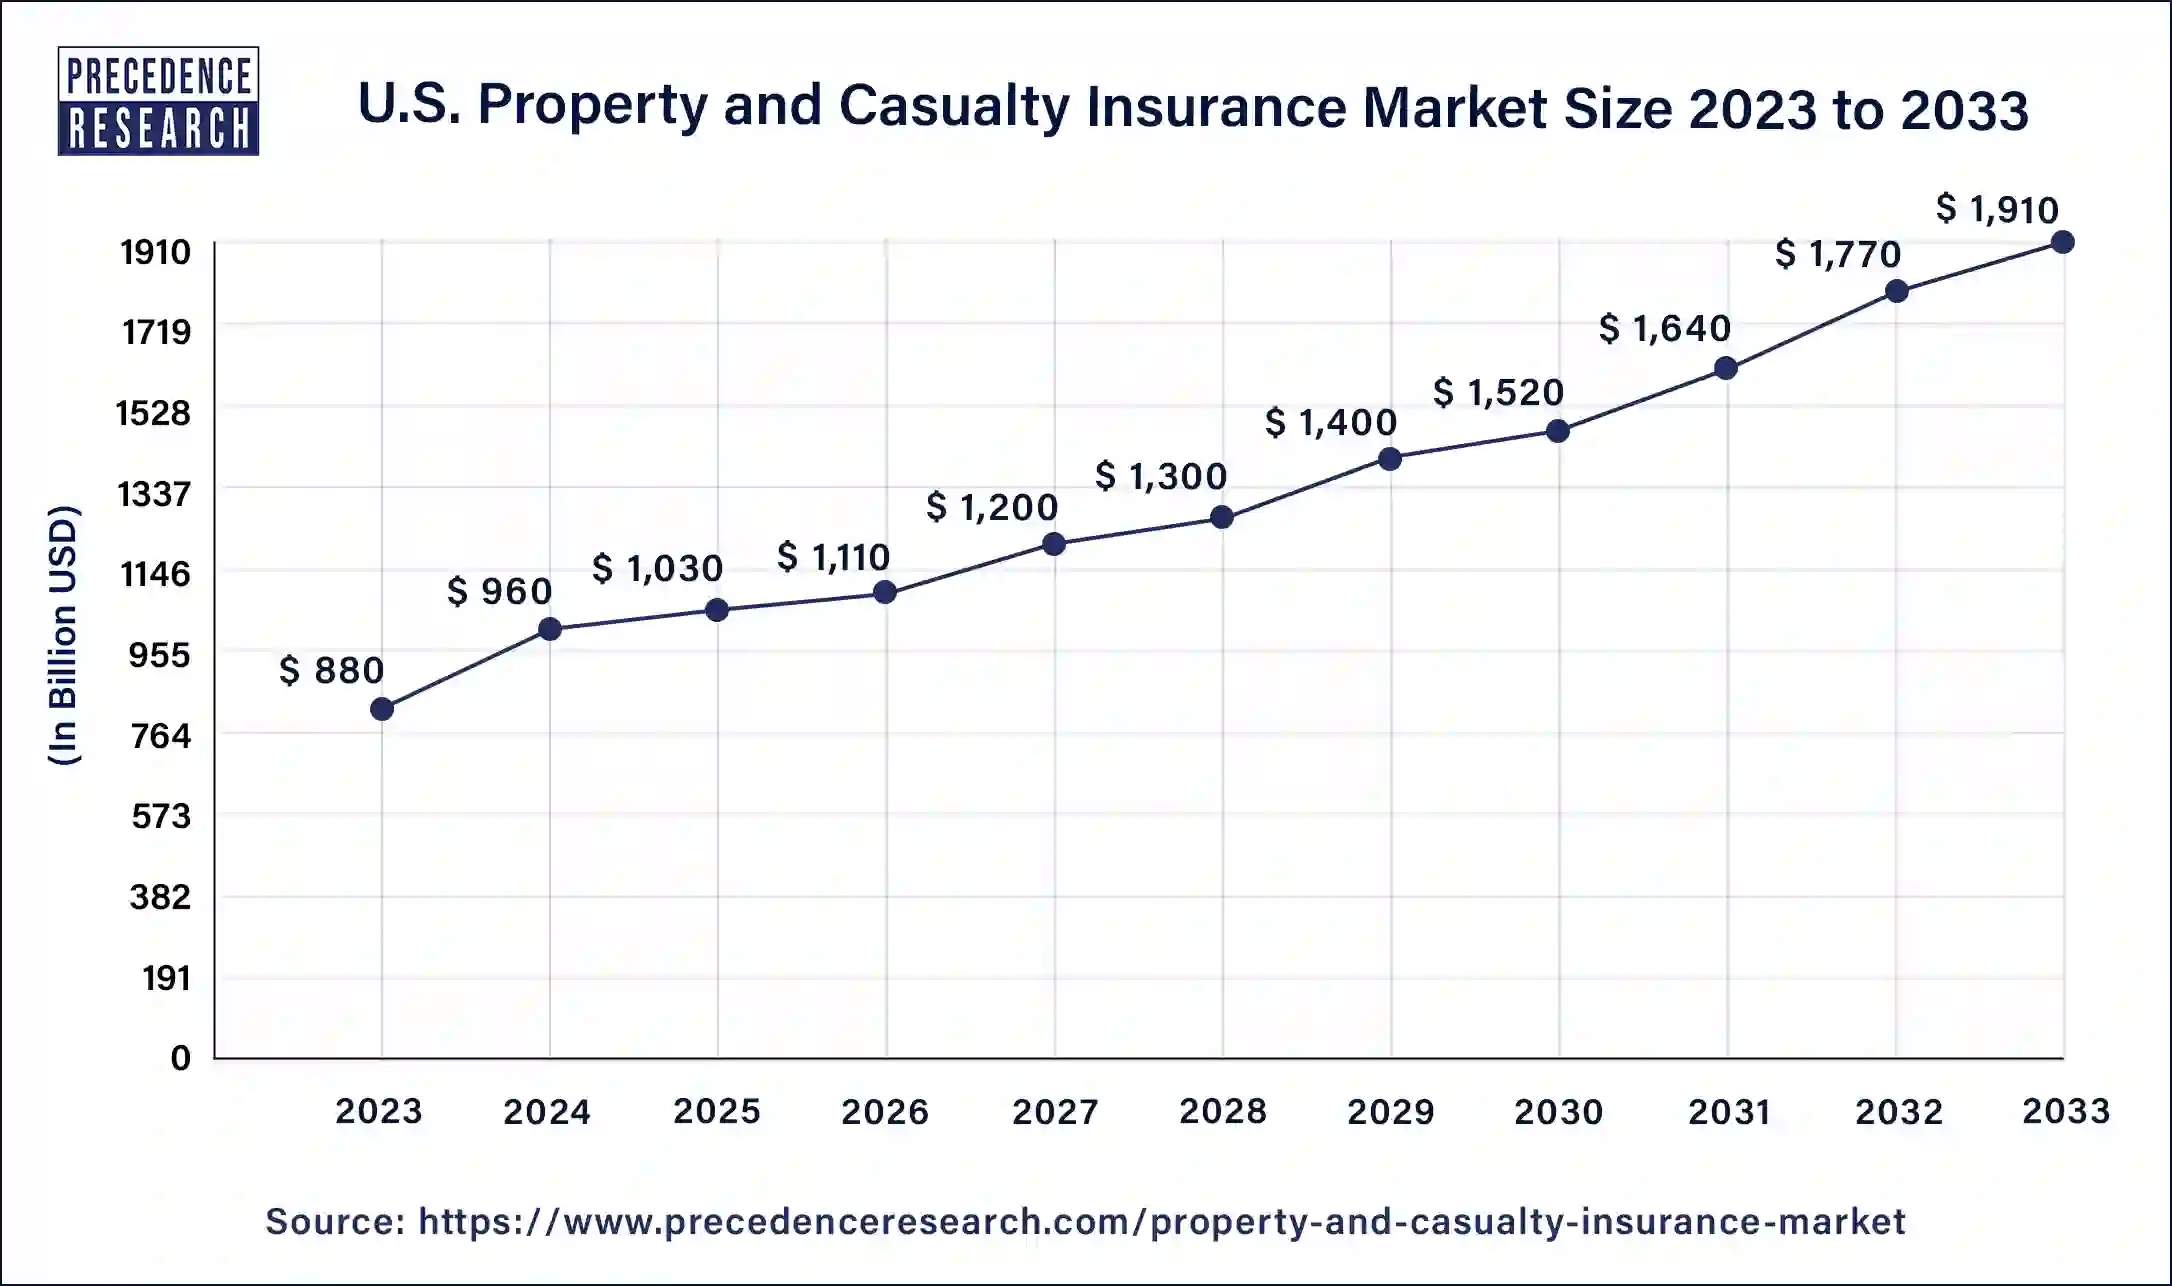 U.S. Property and Casualty Insurance Market Size 2024 to 2033